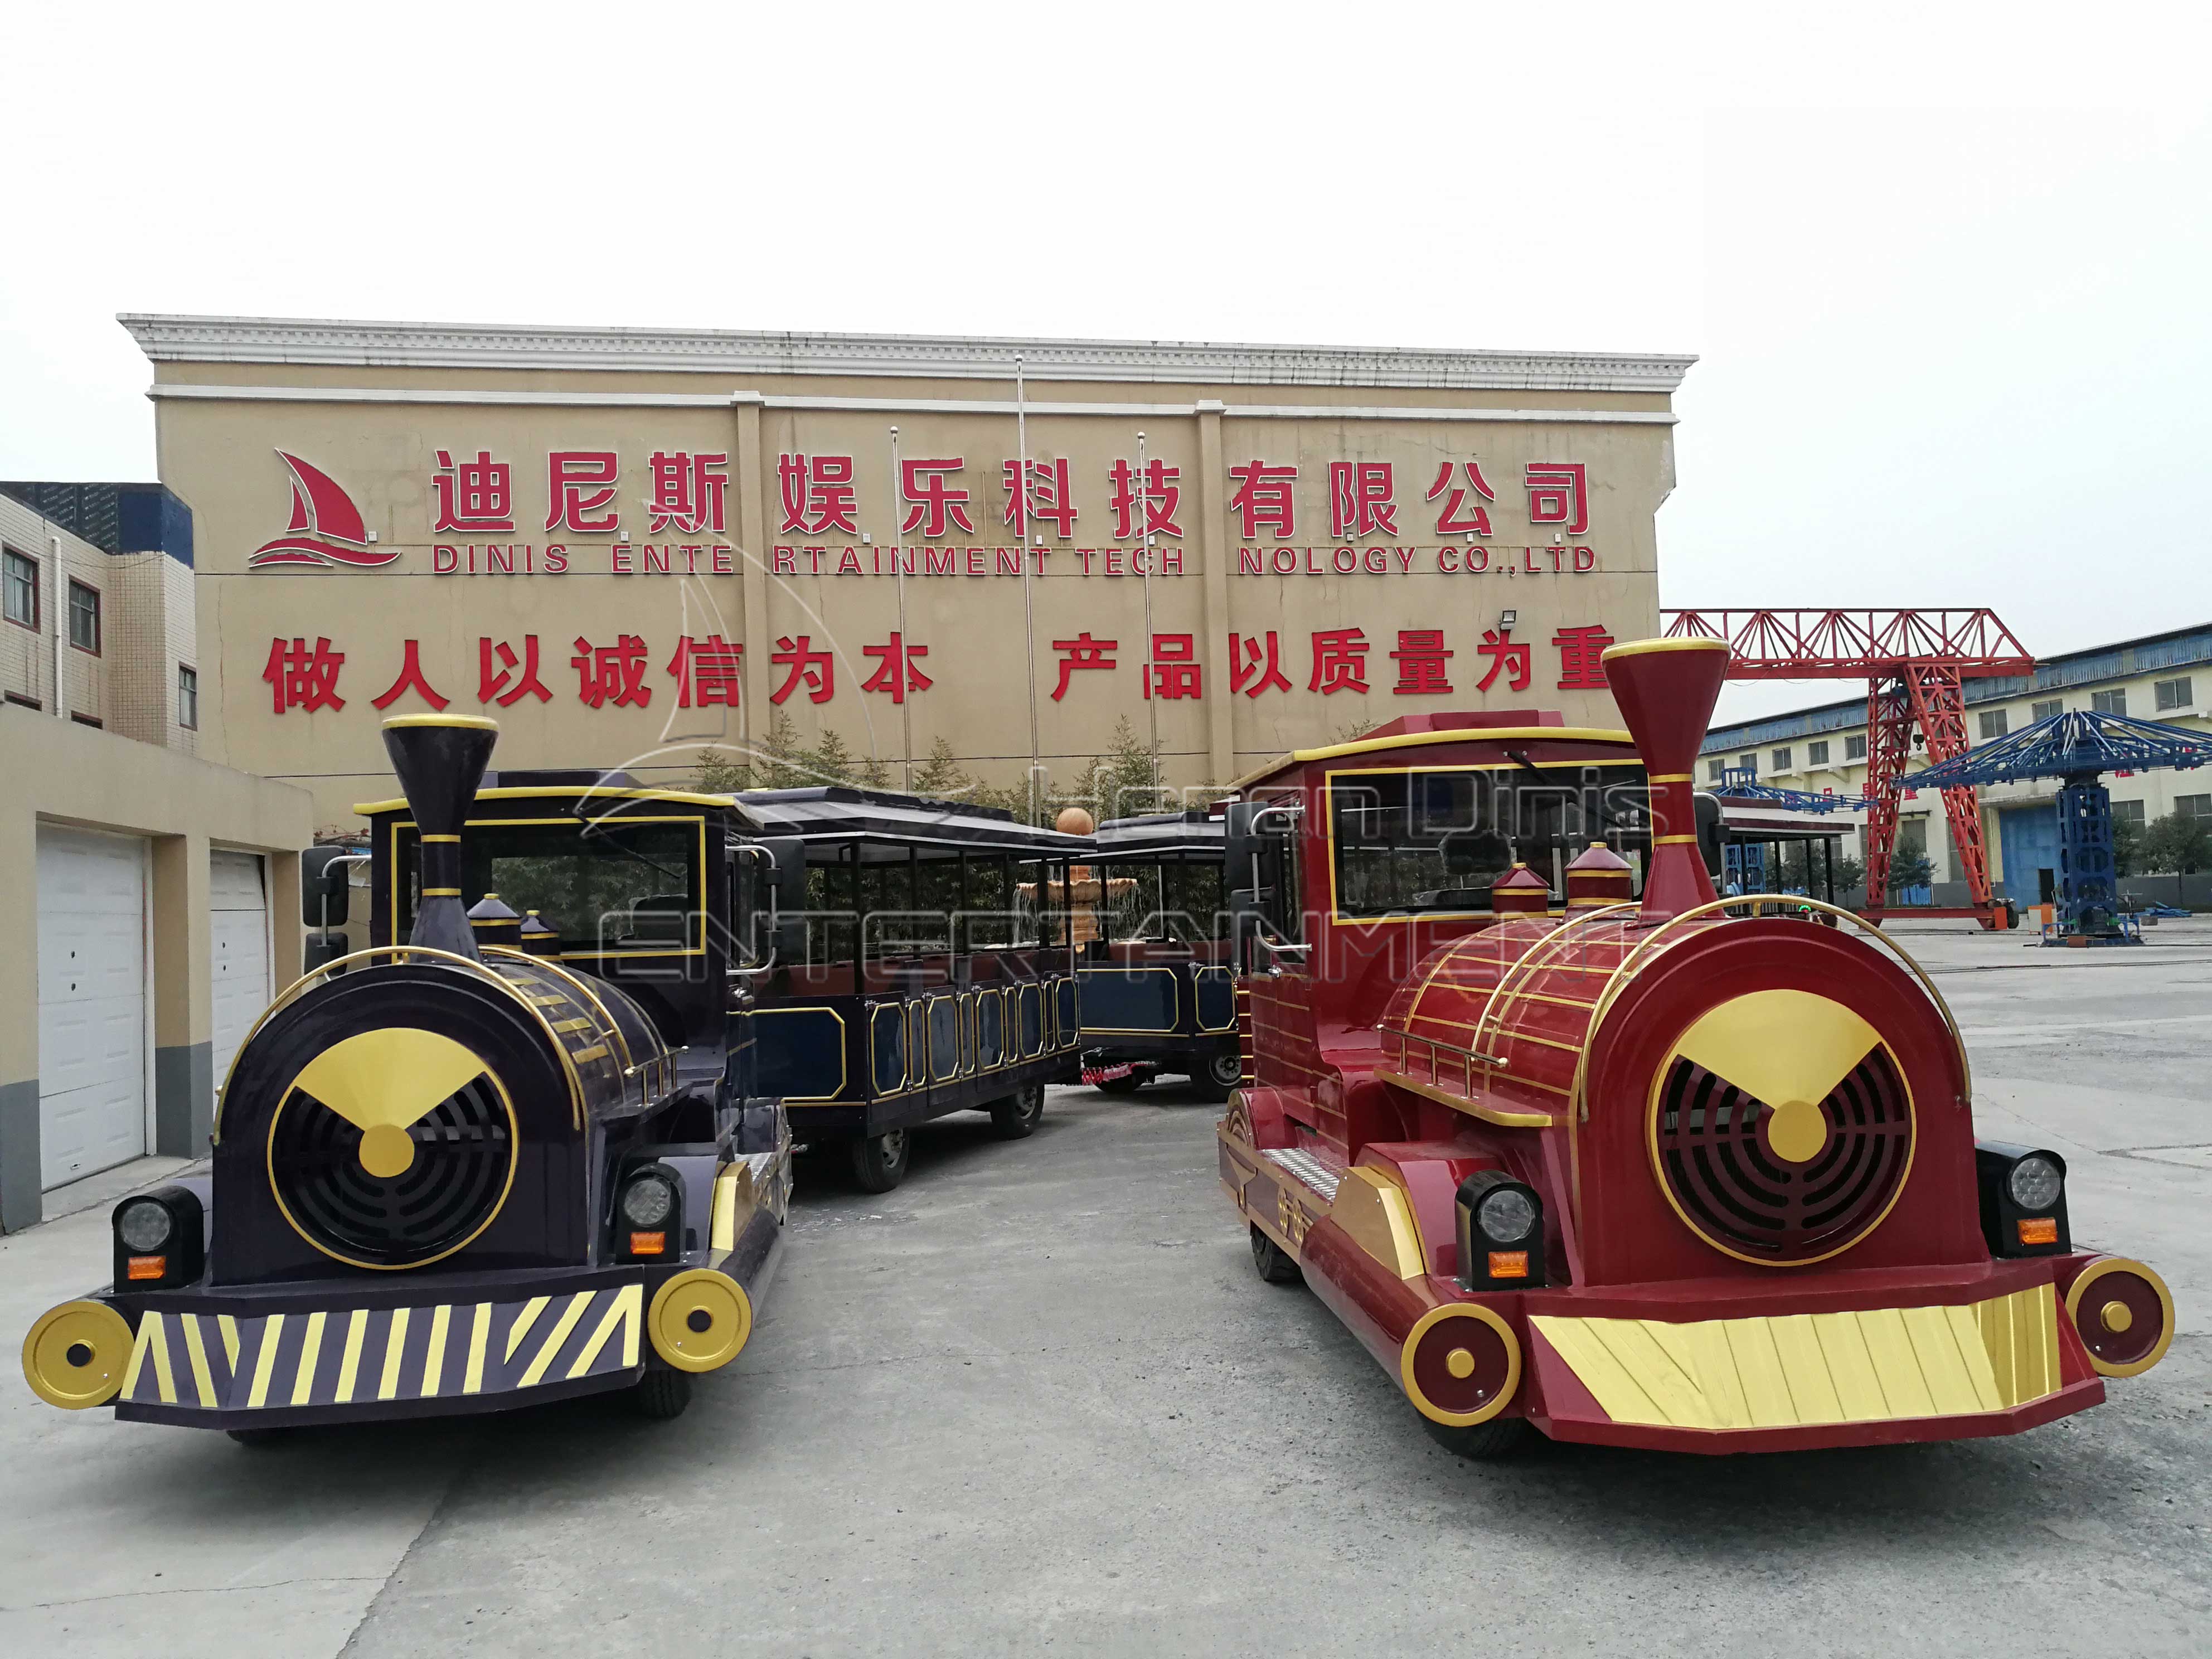 What is sightseeing train ride?